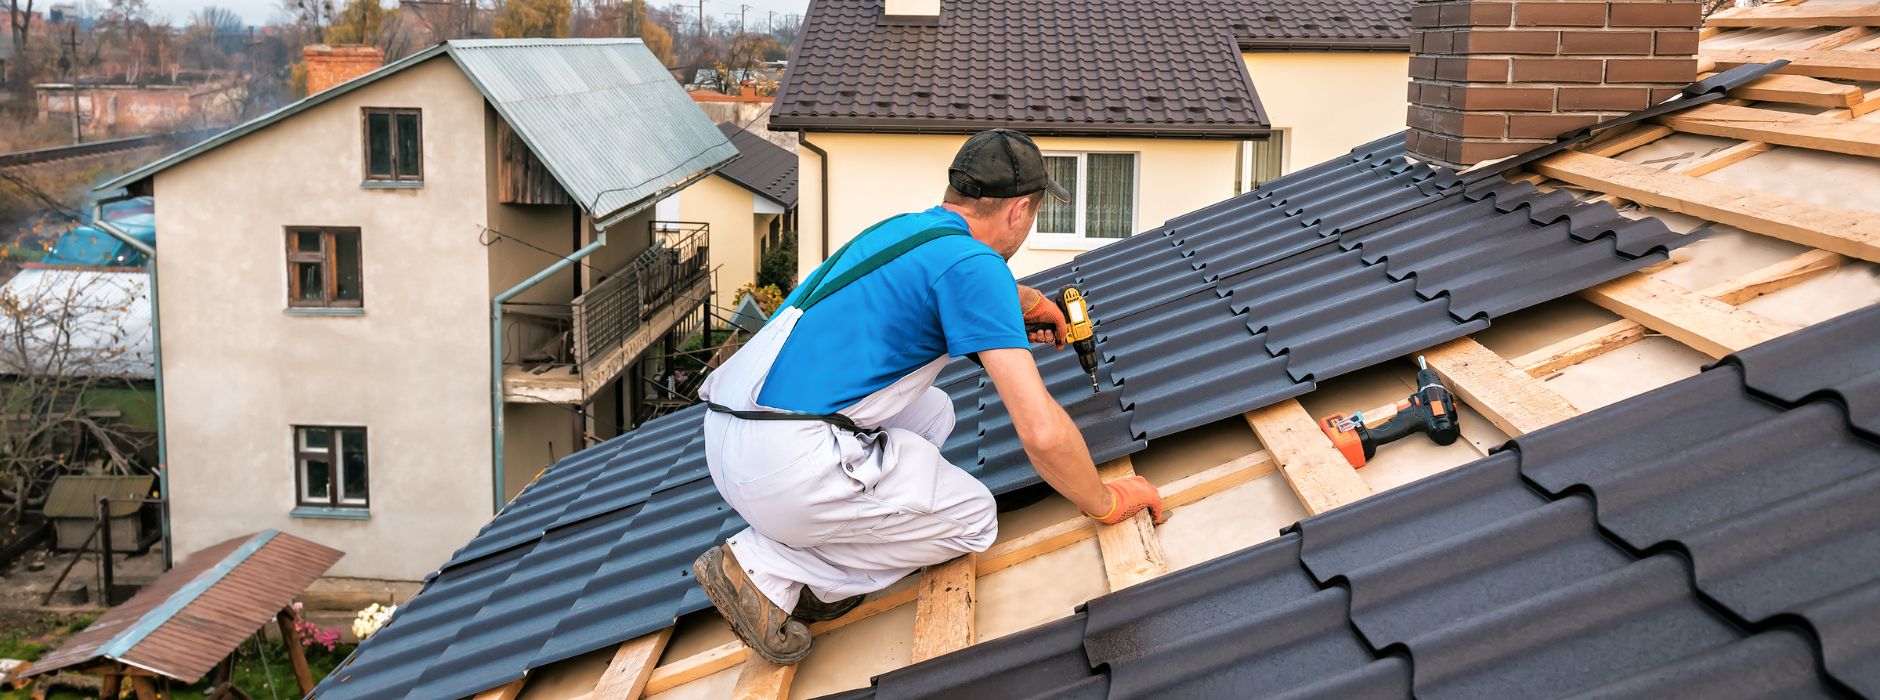 Proper Roof Installation Why it’s Important